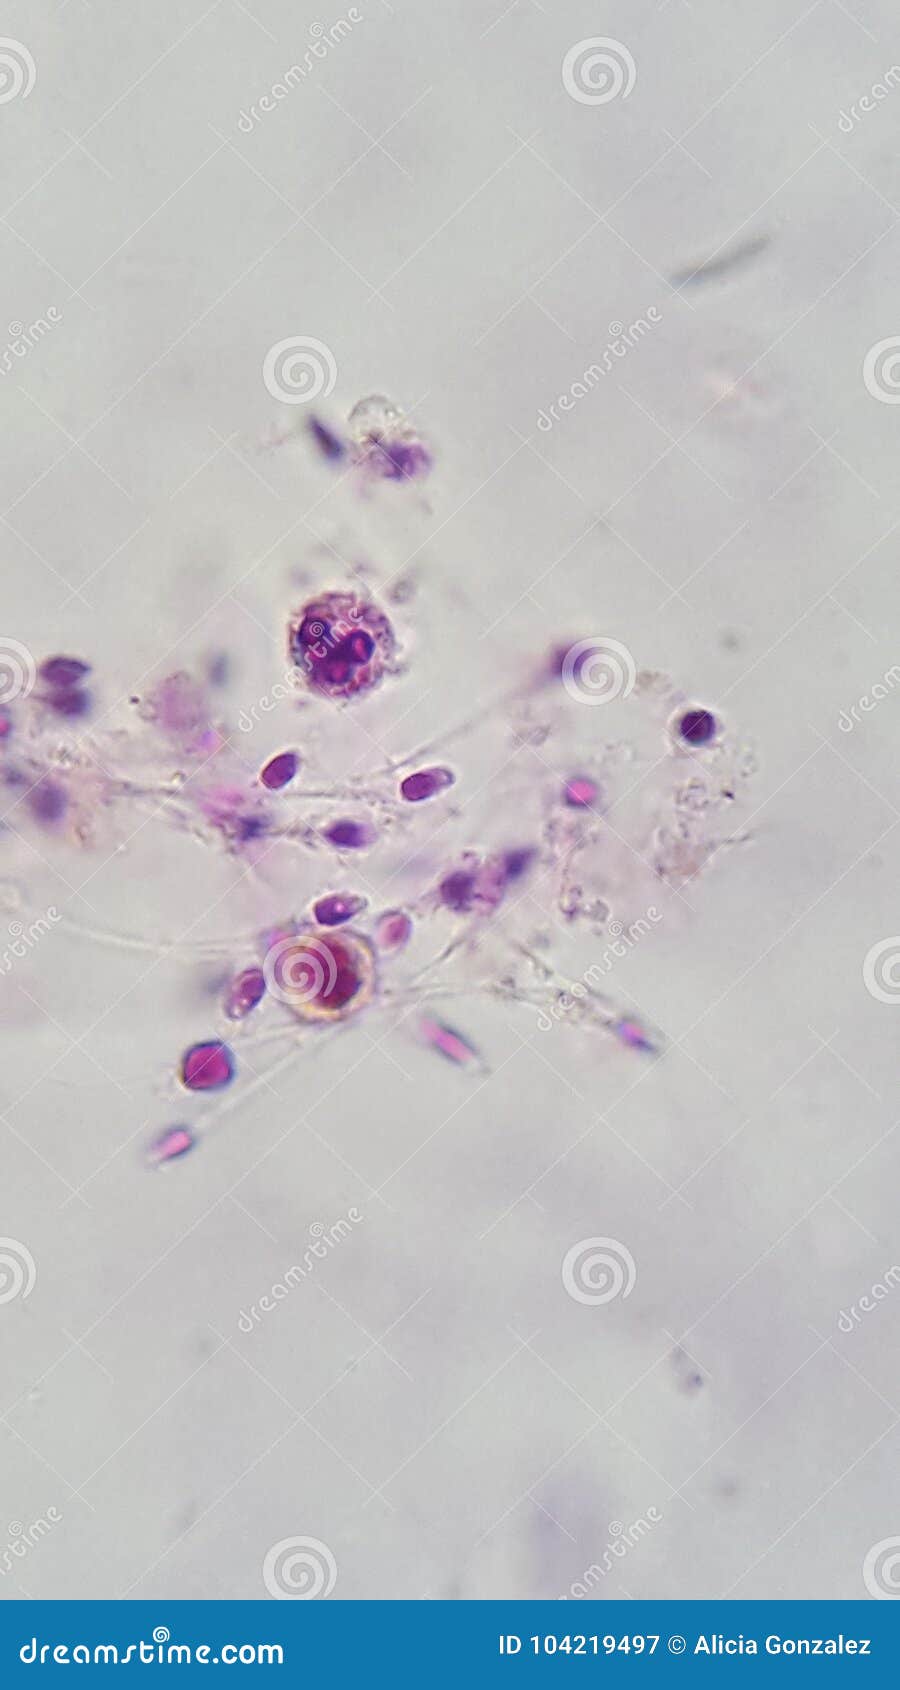 human semen sample show spermatozoon and white blood cell, posible semen infection